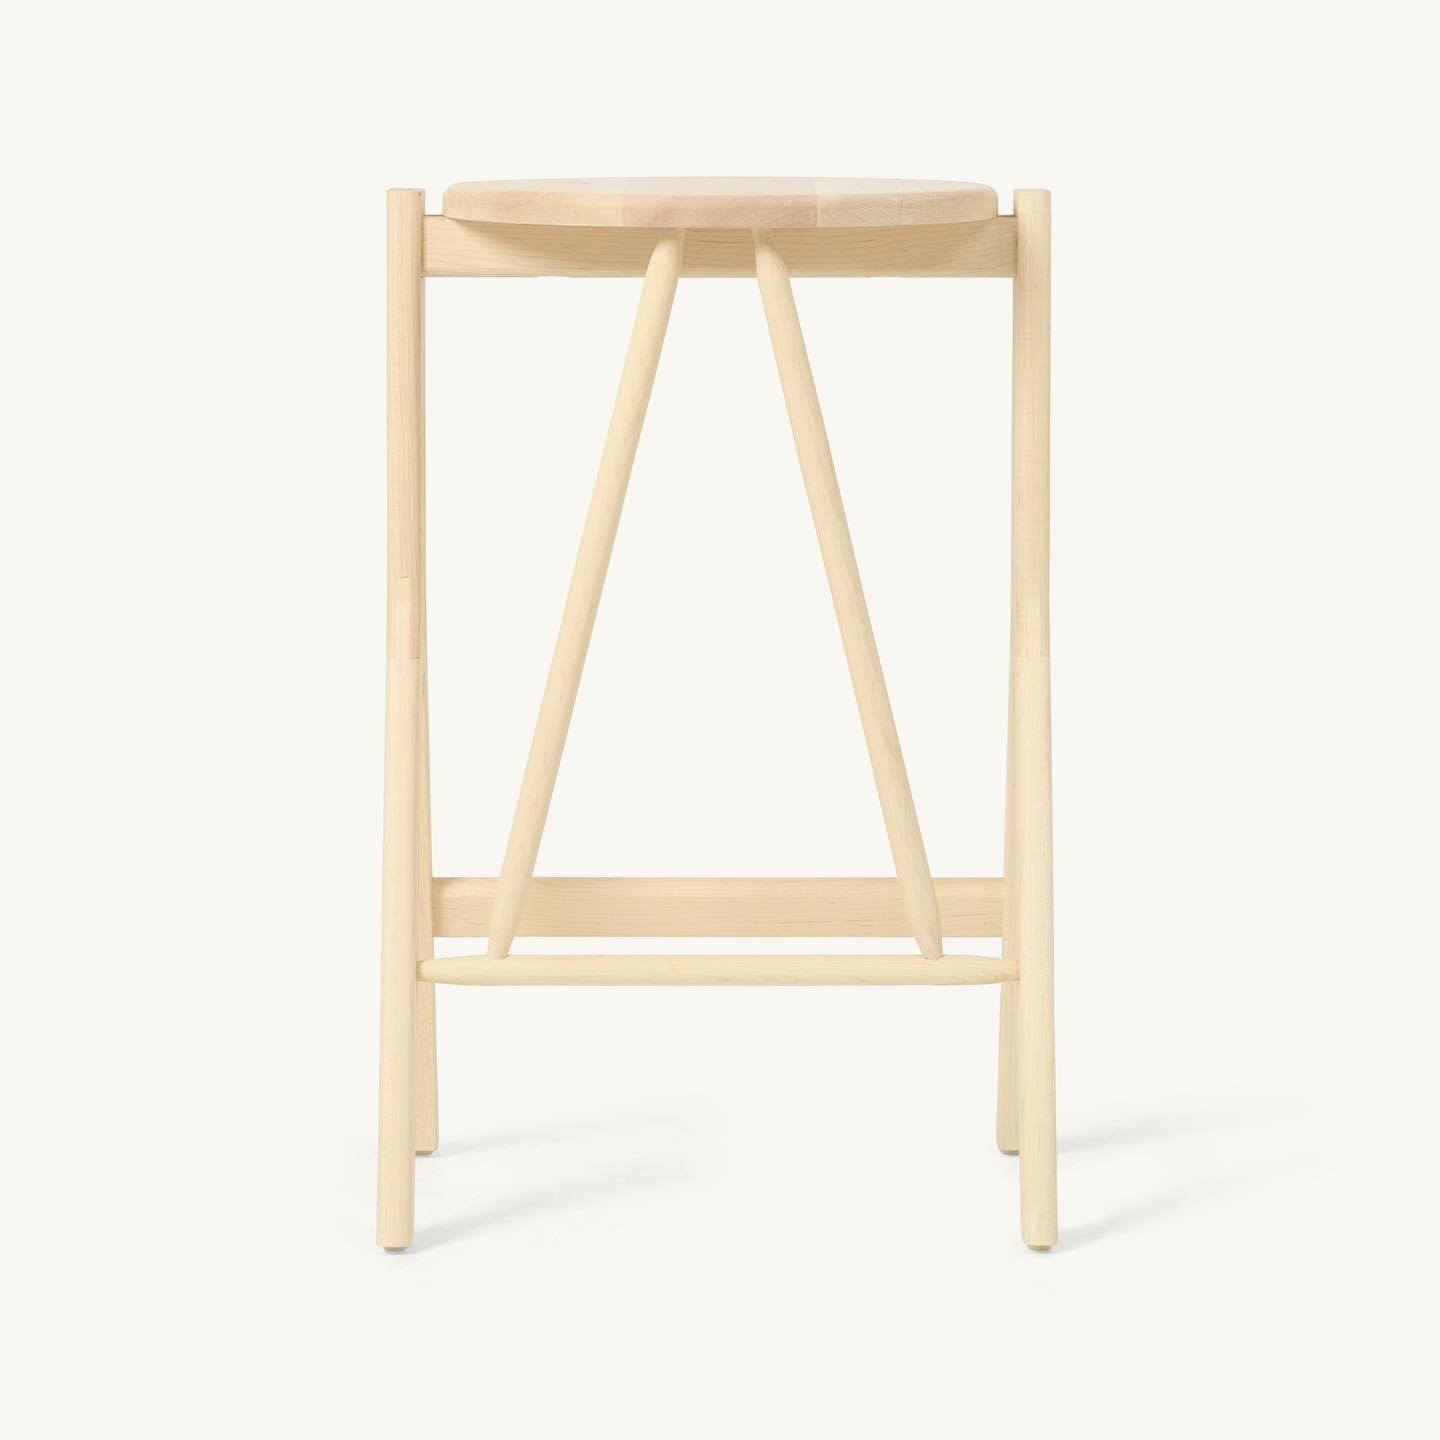 The 650 Stool. 650mm high suitable for breakfast bars, and, bars. 

Handmade with traditional joinery practices in our Melbourne workshop. 

All our furniture is made to order to minimise the use of resources.

📷 @rufusandcooper